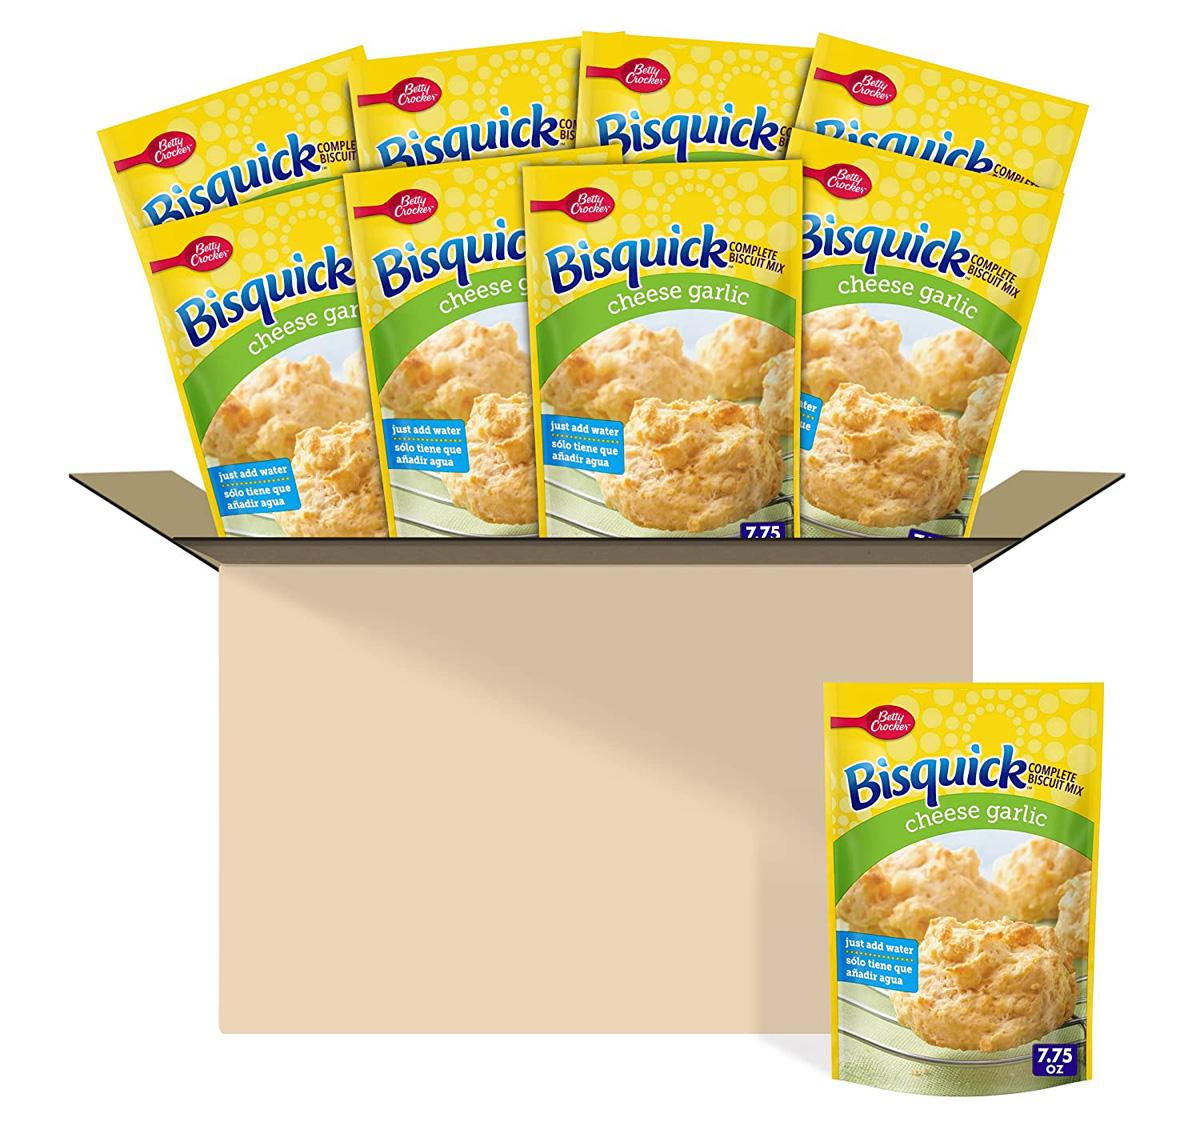 9 Betty Crocker Bisquick Biscuit Mix Garlic Cheese for $6.75 Shipped